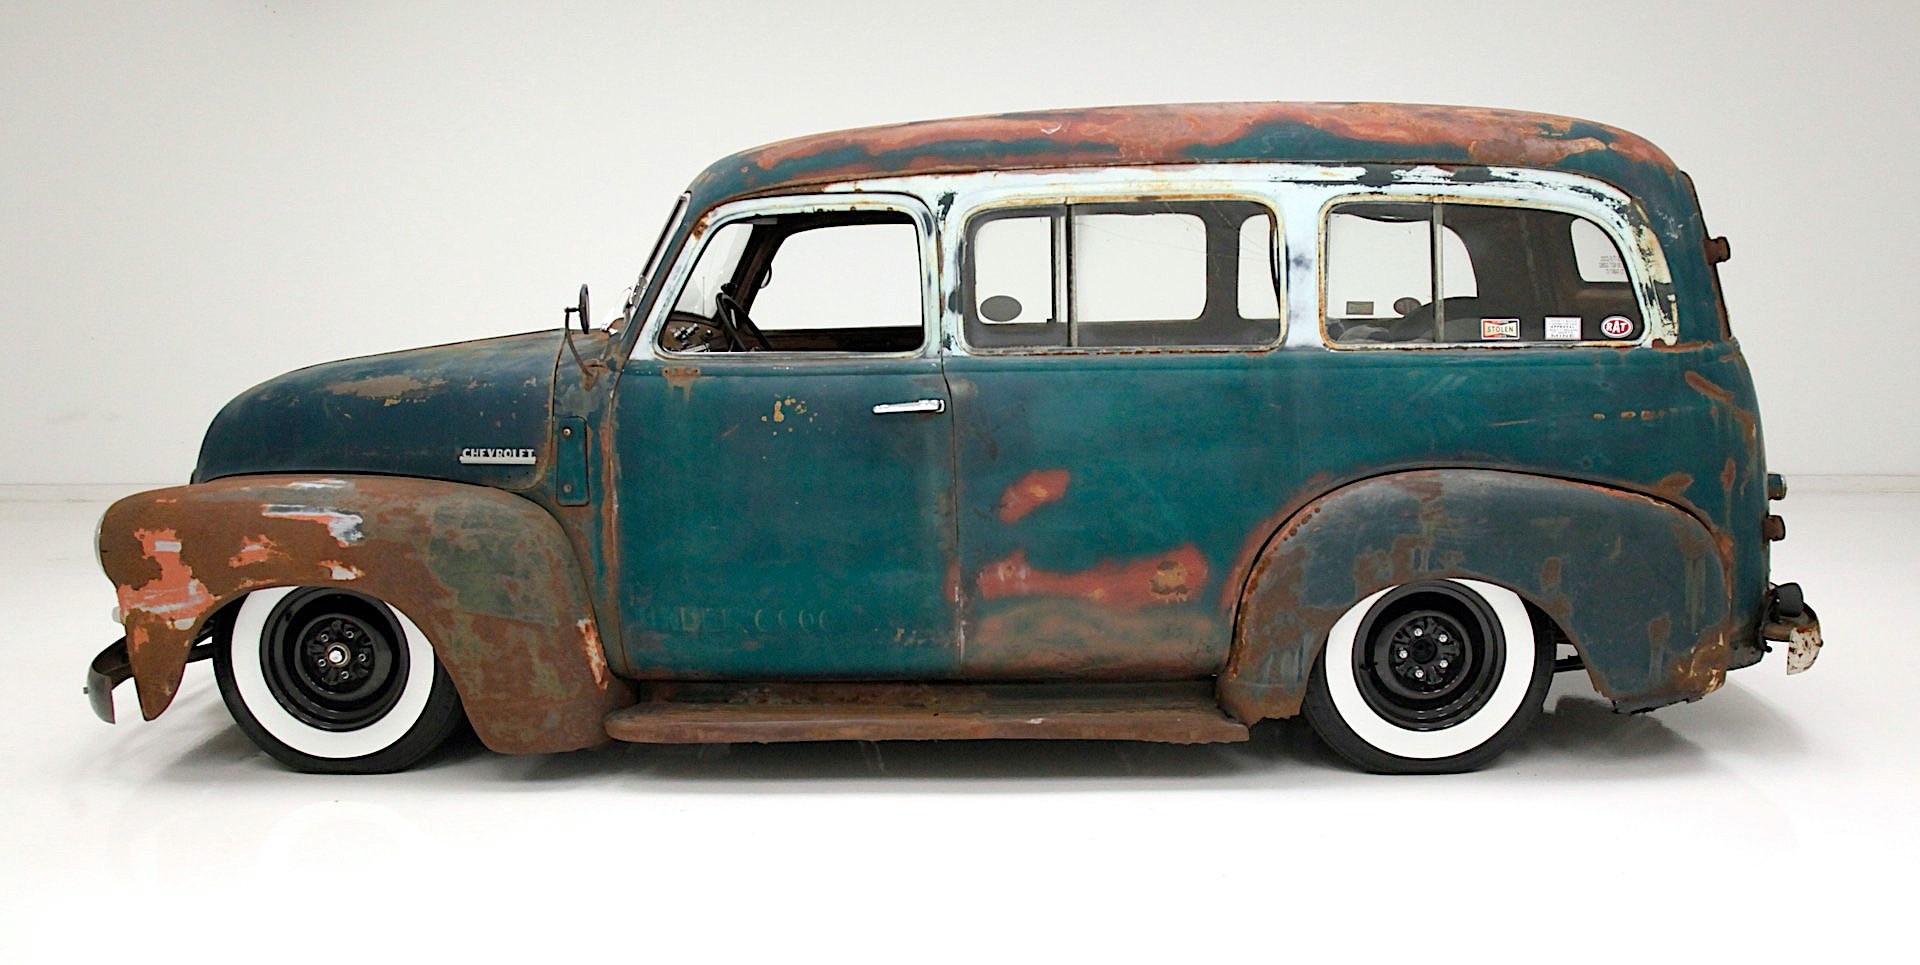 Rusty-Old 1948 Chevrolet Suburban Shows Decades of Decay, It's